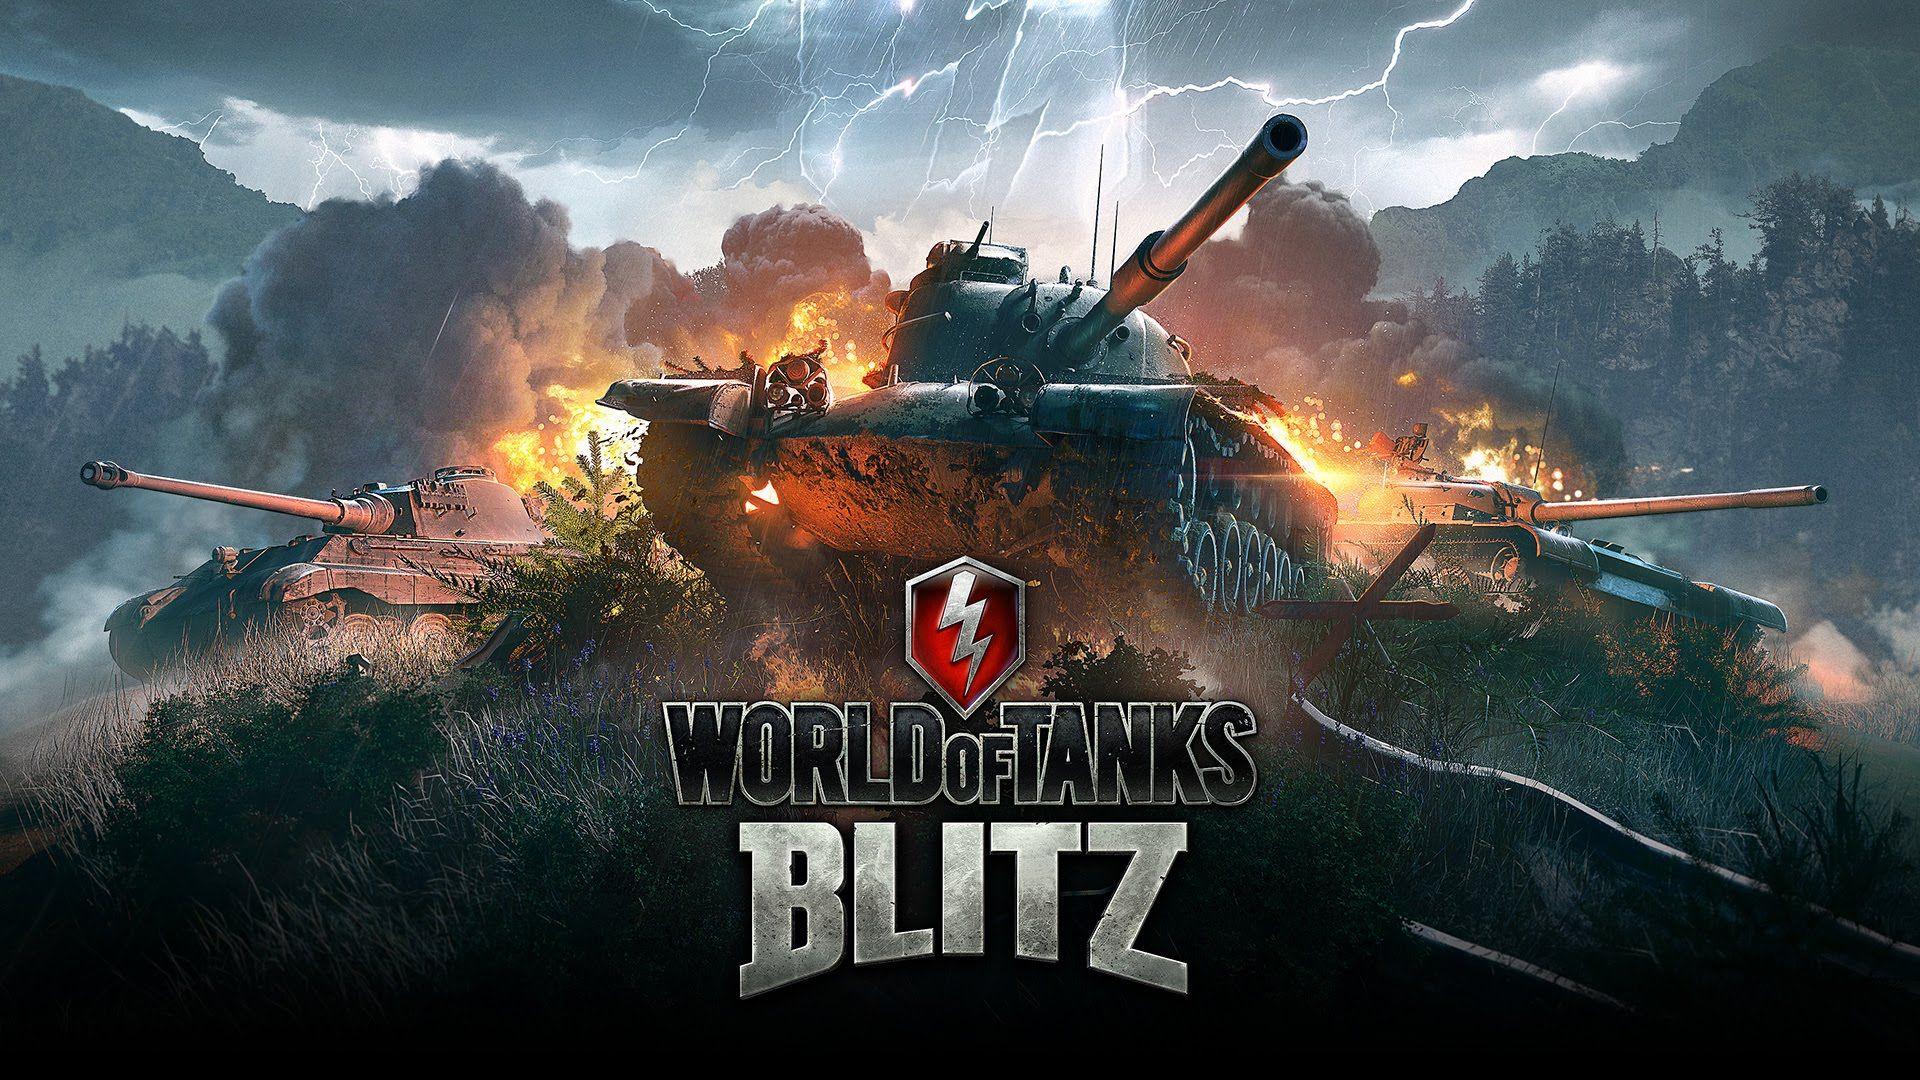 what are some websights to mod world of tanks blitz